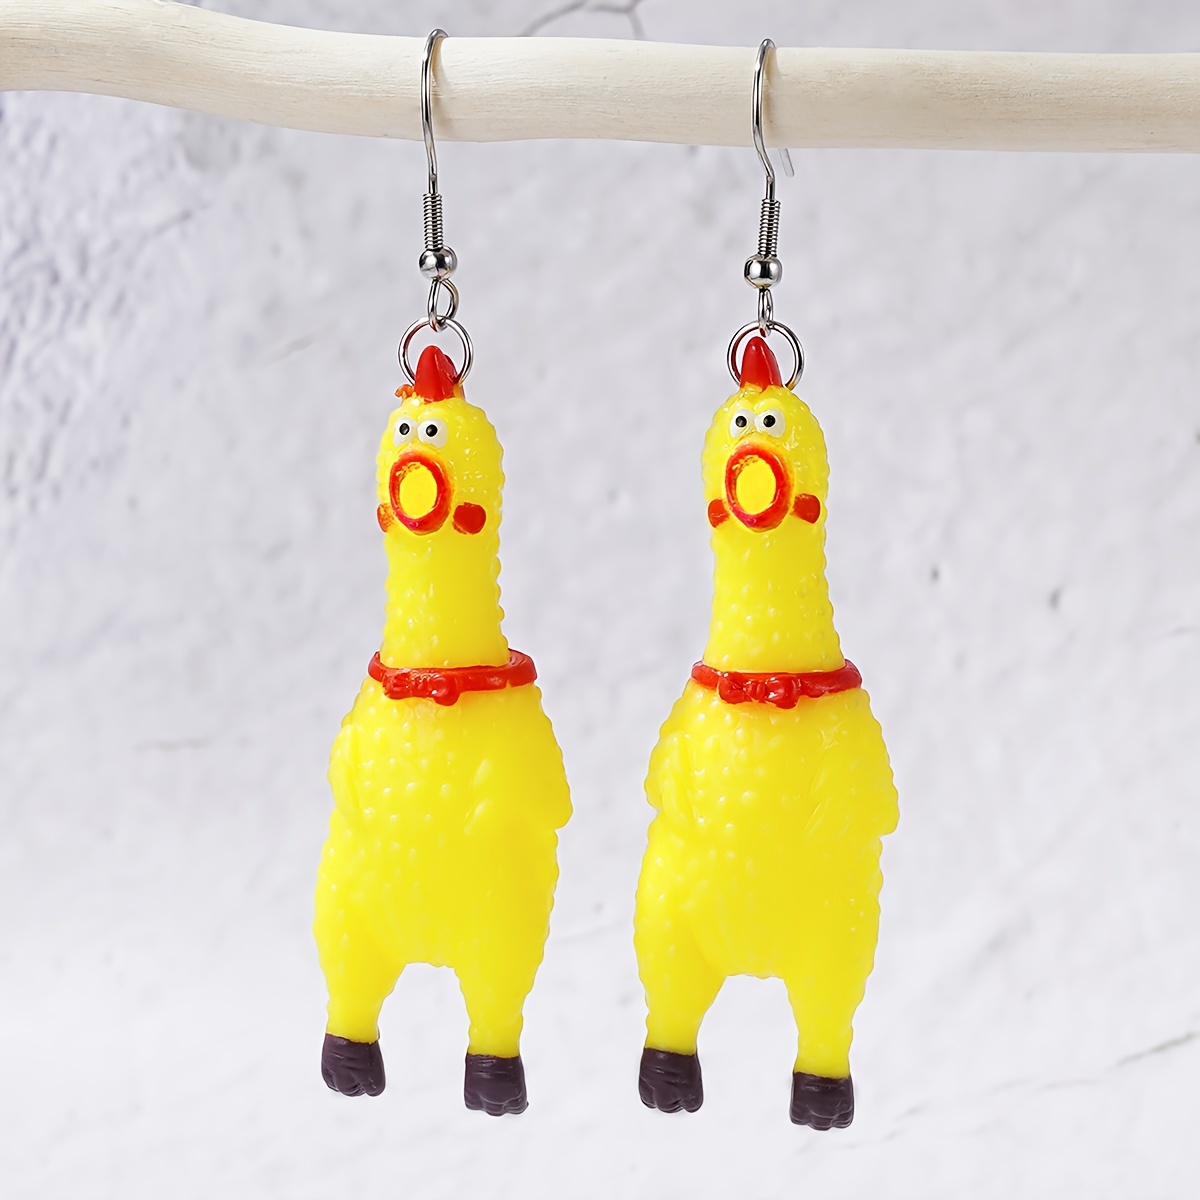 

Chic Mini Chick Squeeze Dangle Earrings - Quirky Animal Design, Acrylic With Silvery Posts For Everyday & Party Wear Earrings For Women Quirky Earrings